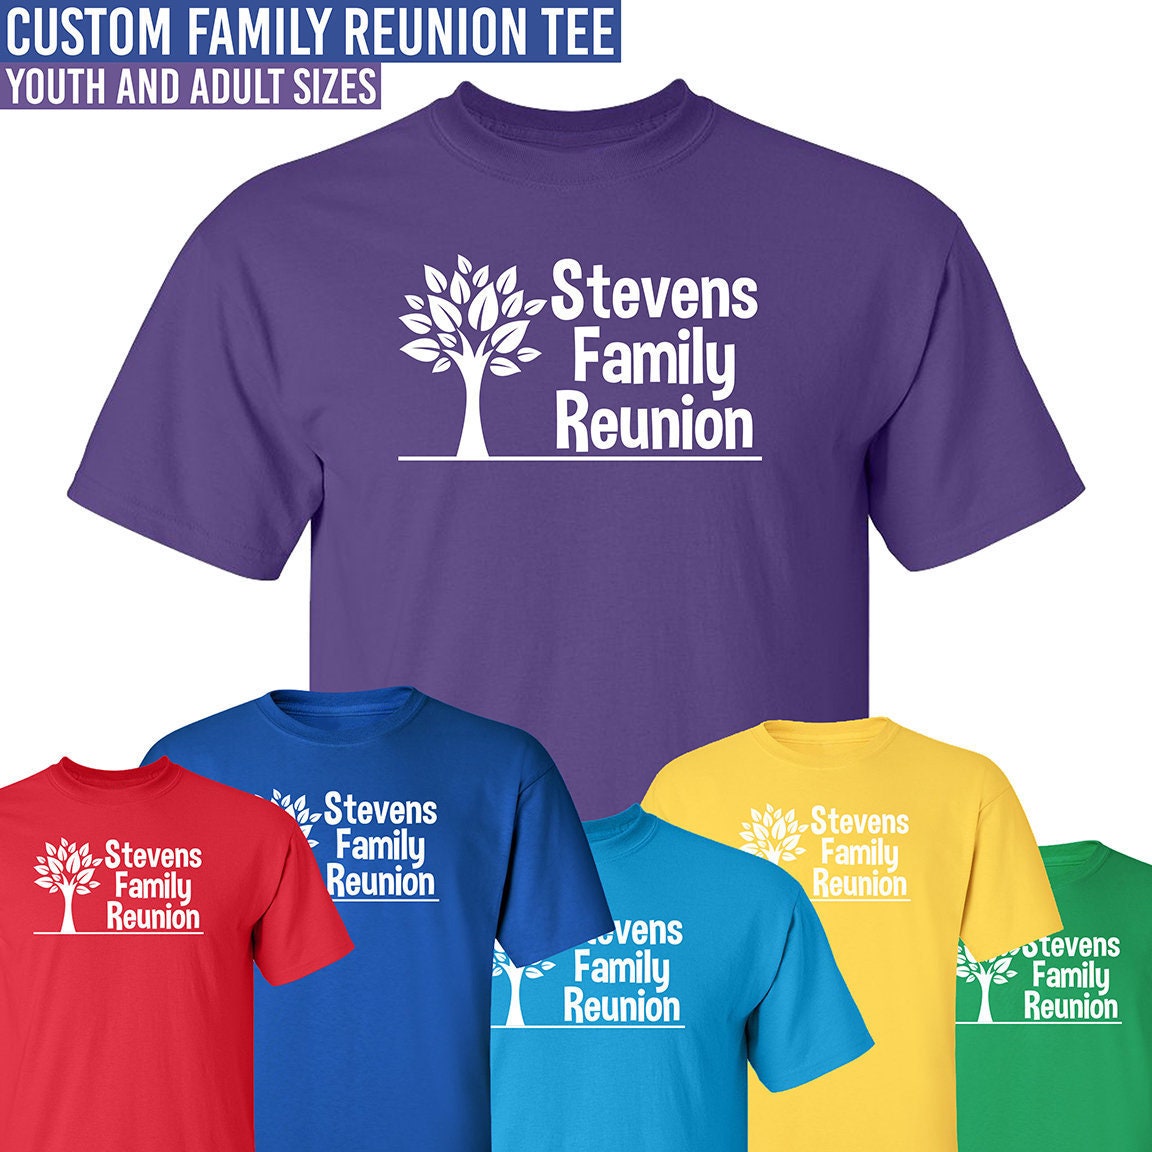 Screen Printed WHOLESALE T-shirts, Custom T-shirts, Personalized T-shirts  Family Reunion School Work Shirts Front & Back Printing 